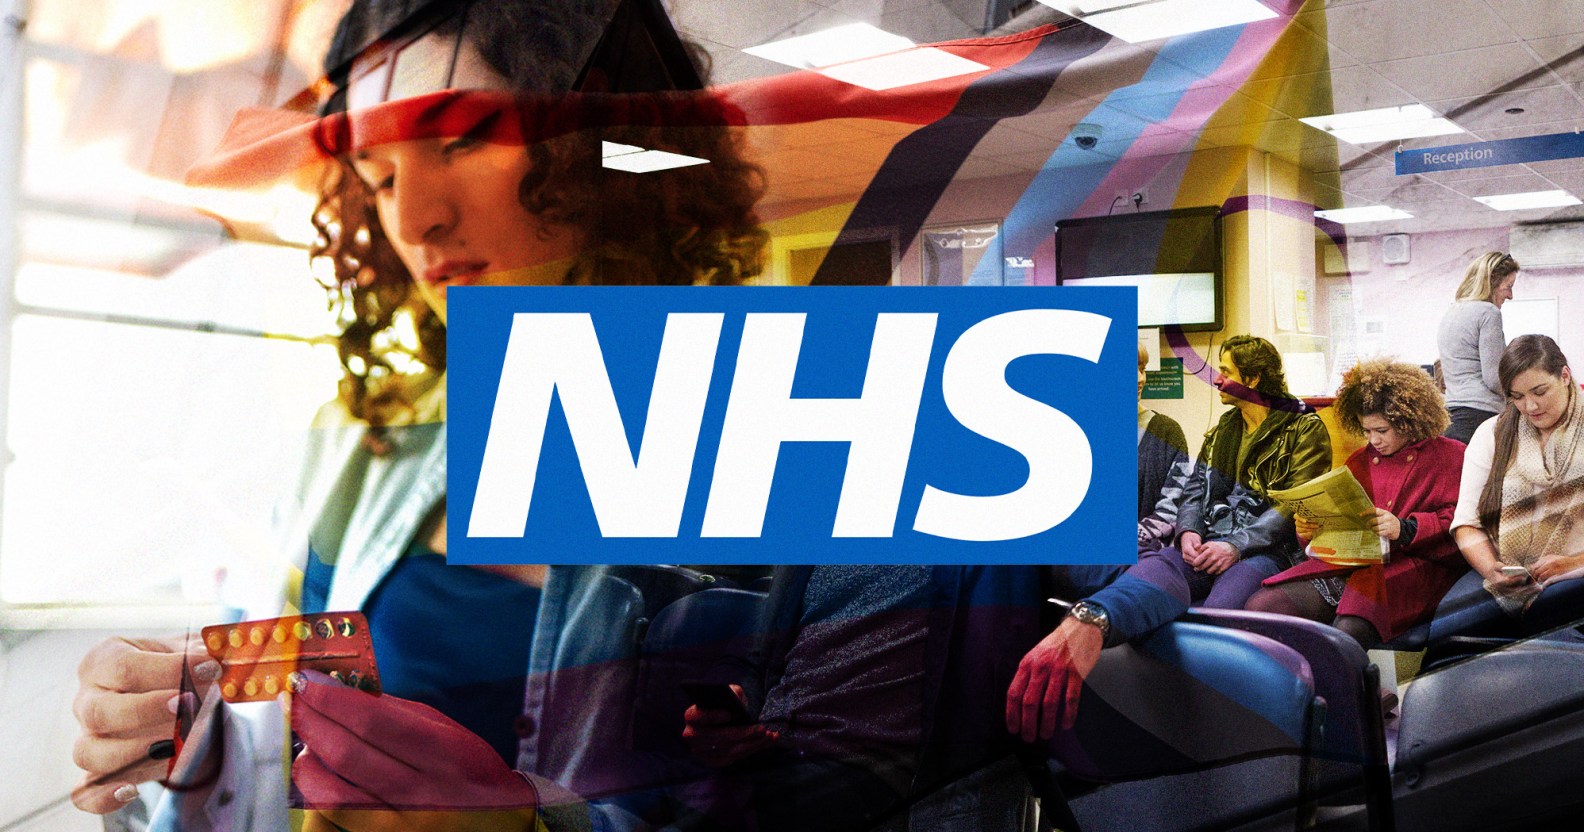 An image shows a person with long dark hair taking pills out of a box. The colours of the Progress Pride flag are visible in the background and the NHS logo is emblazoned over the image.